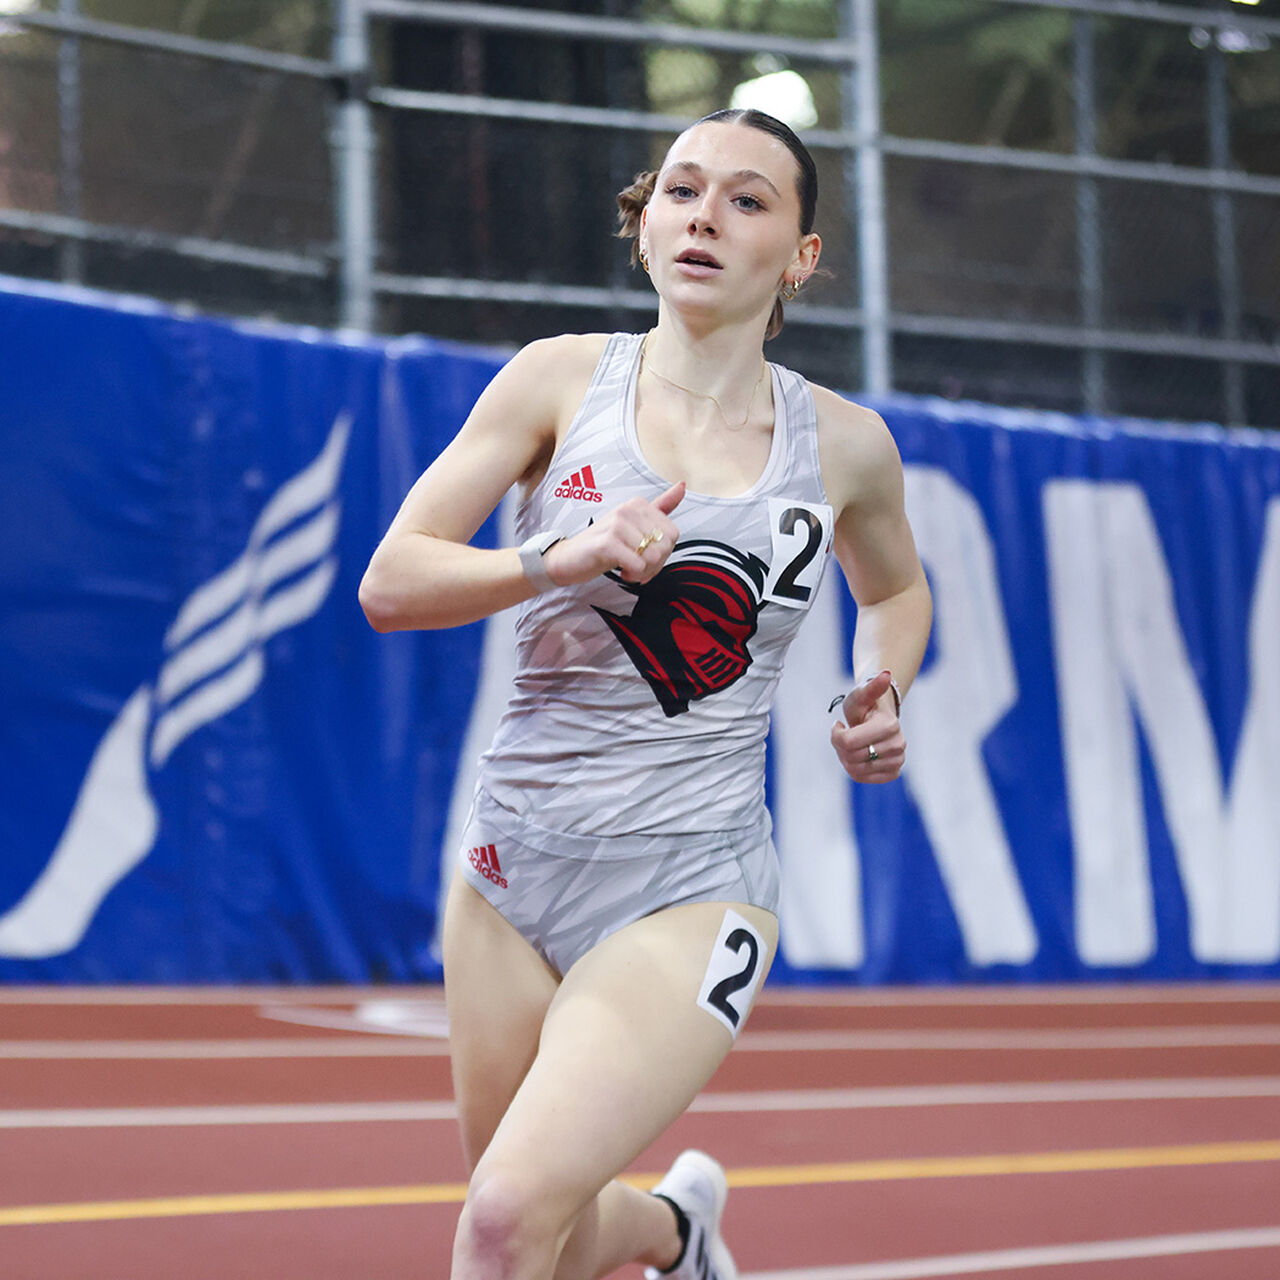 Scarlet Knight student-athlete running on an outdoor track image number 0